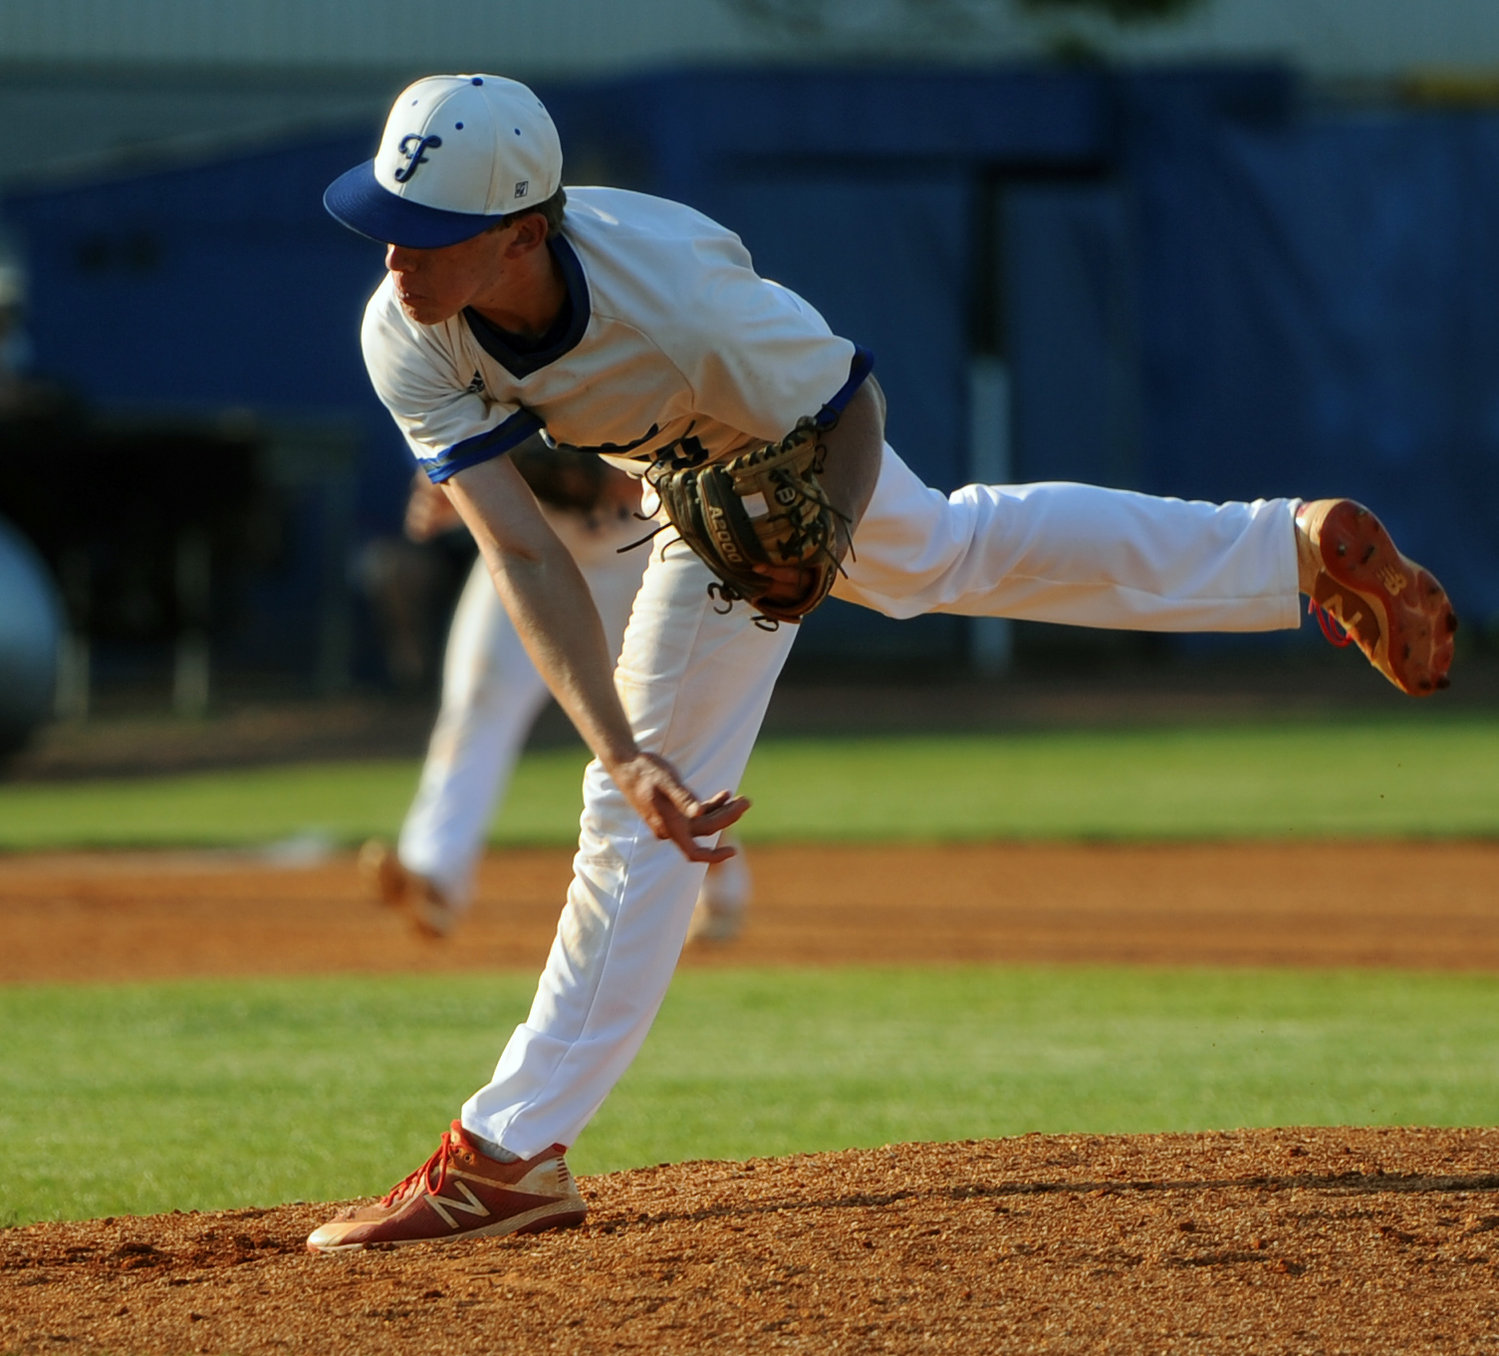 Preston Gentry pitched a key 2 2/3 innings in relief for the Rockets.